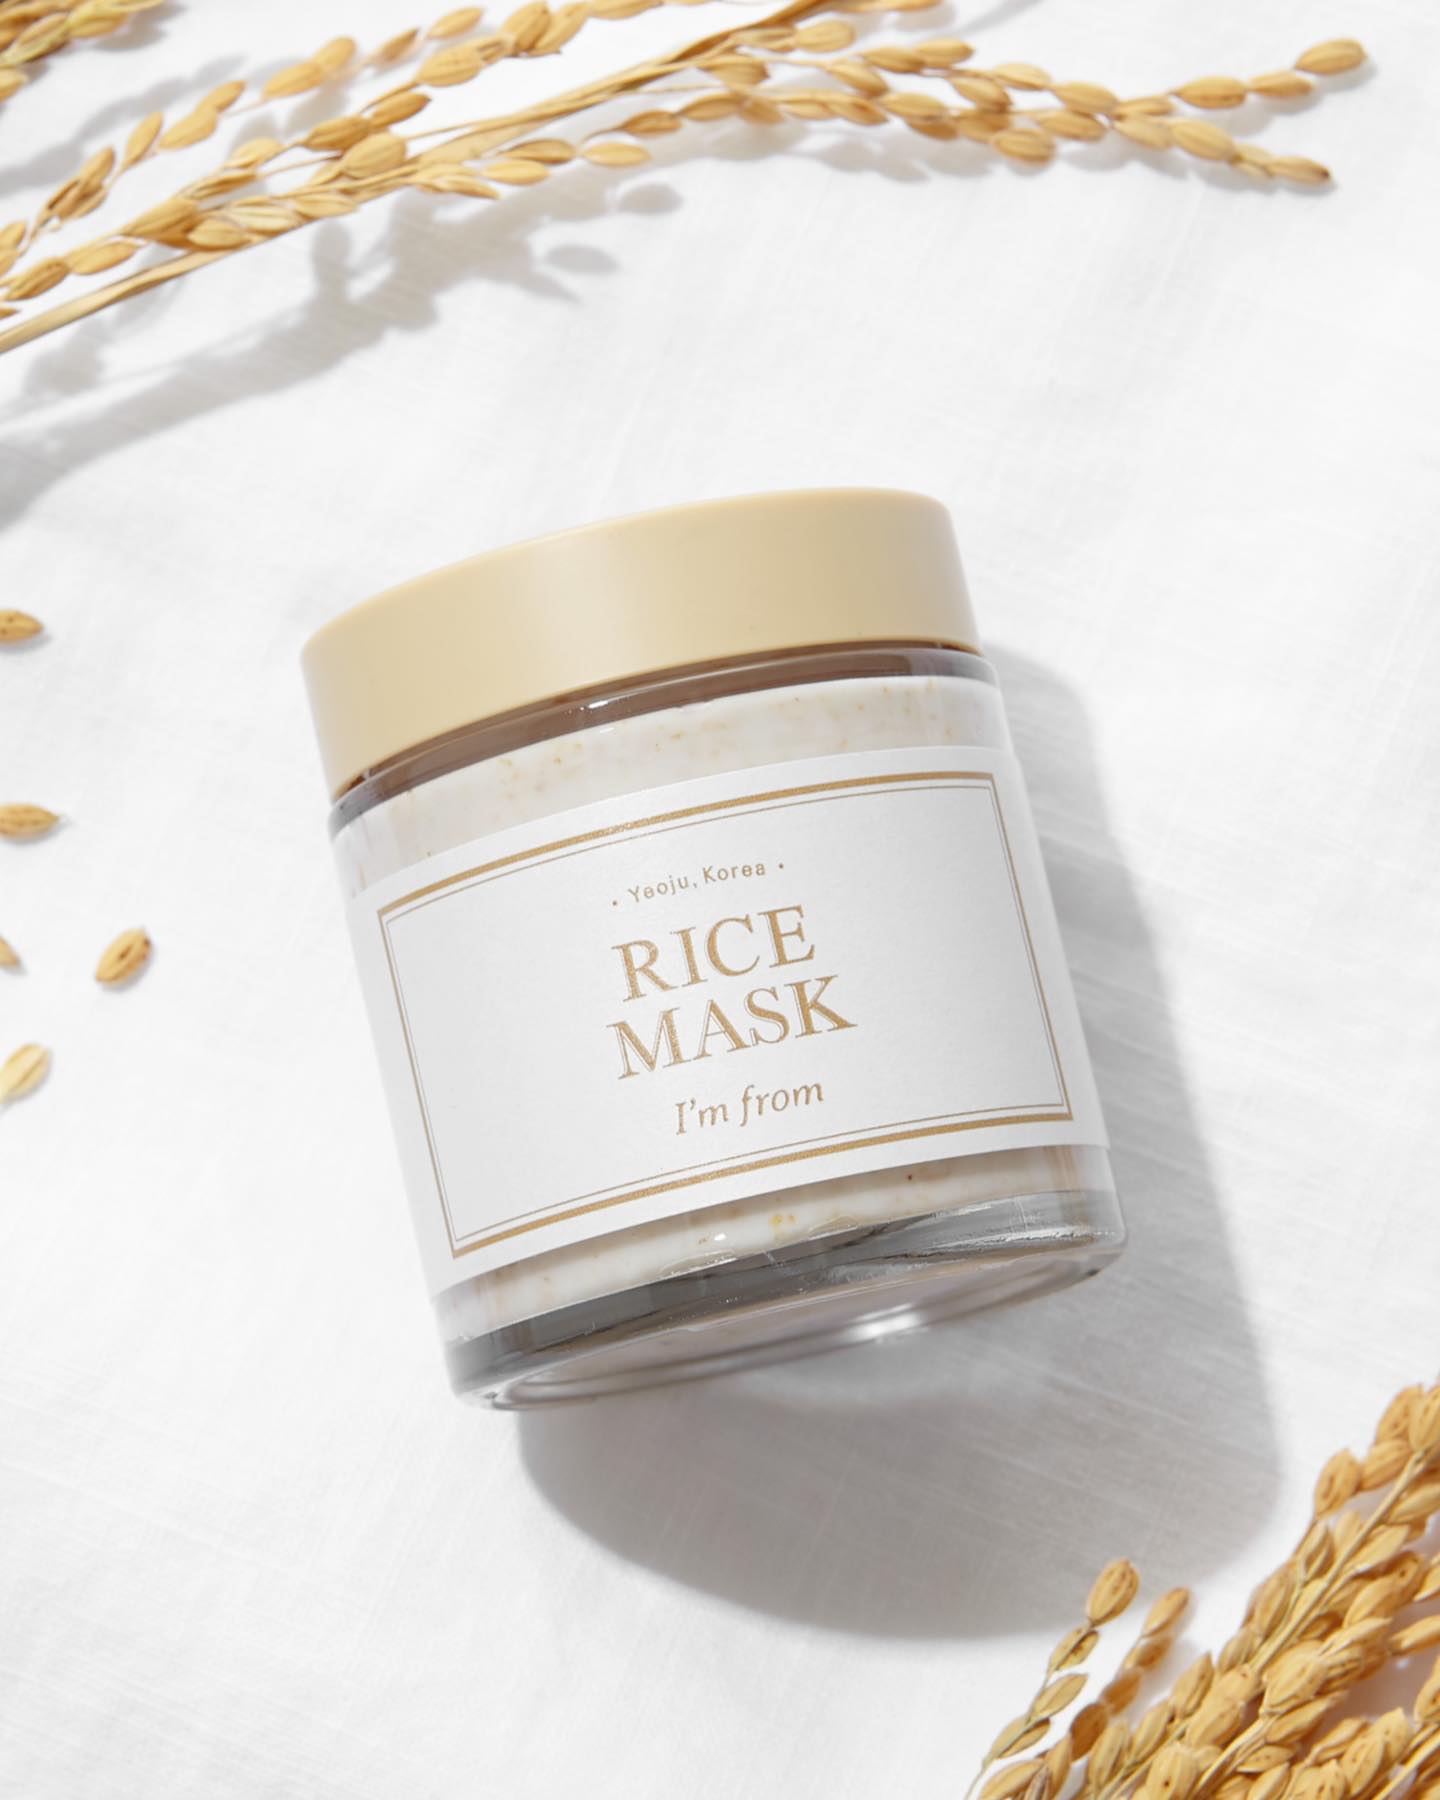 Rice mask-scrub for face by I'm From (I'm From Rice Mask)